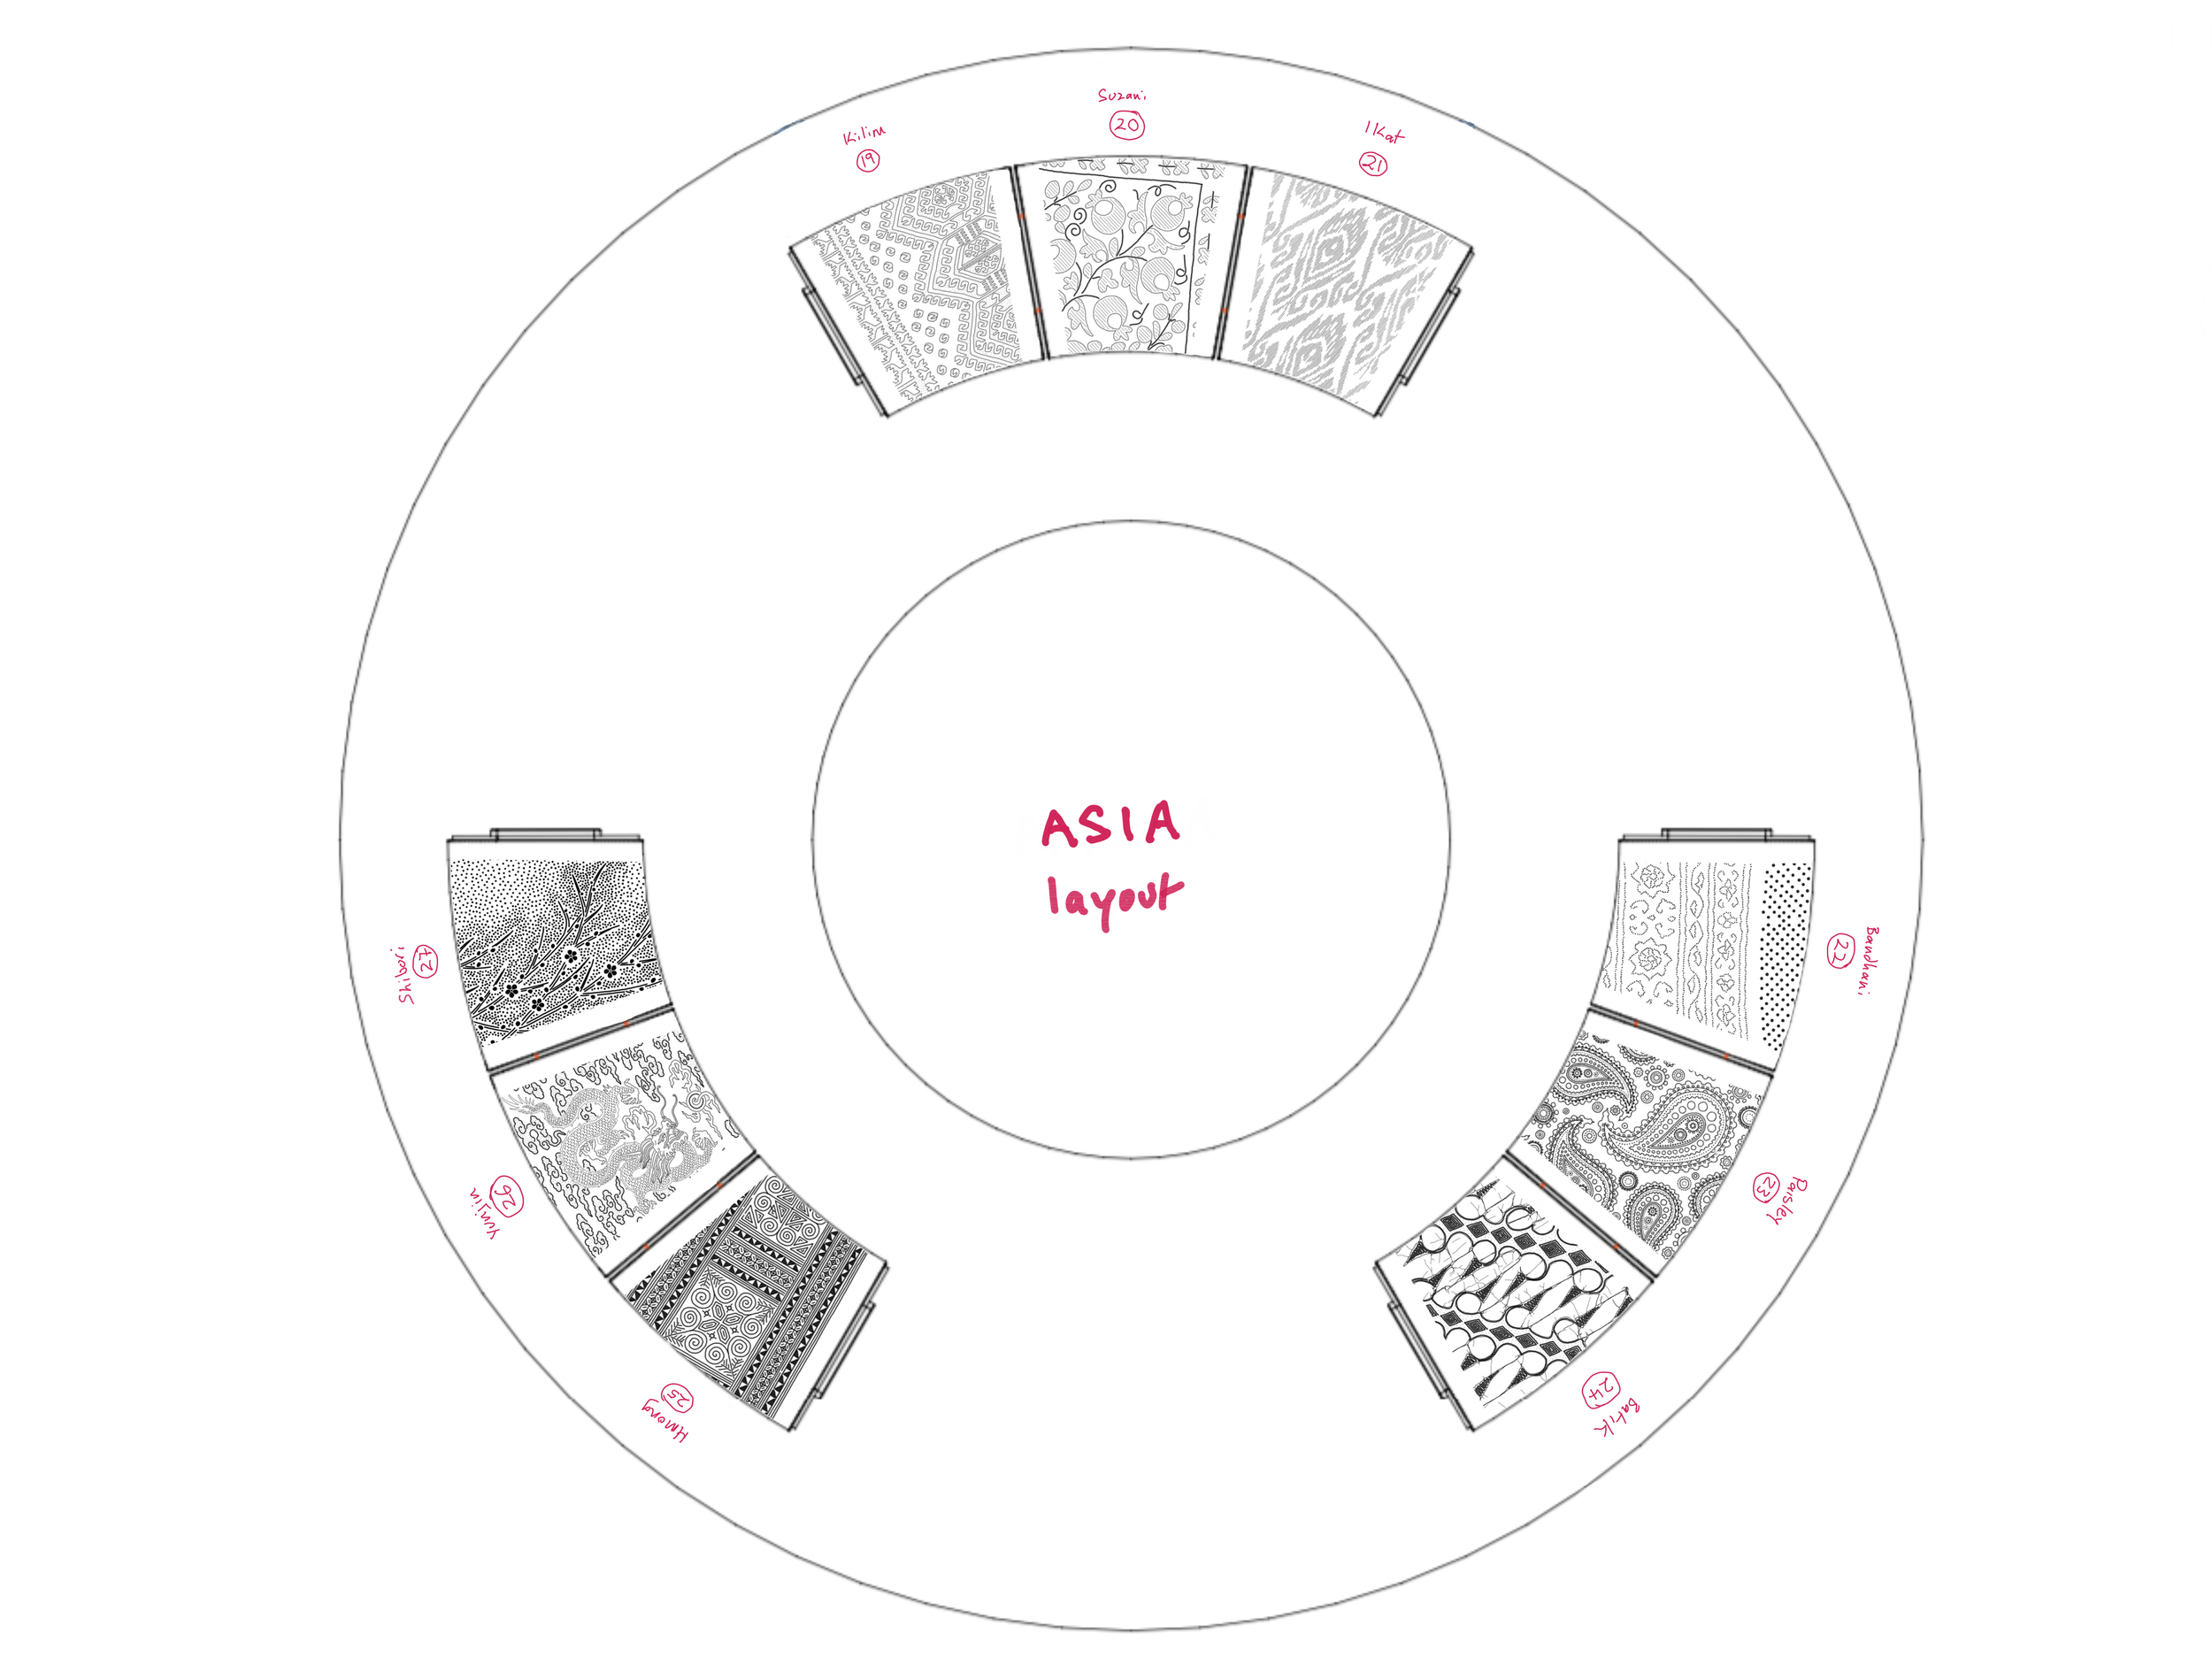 Asia layout.png